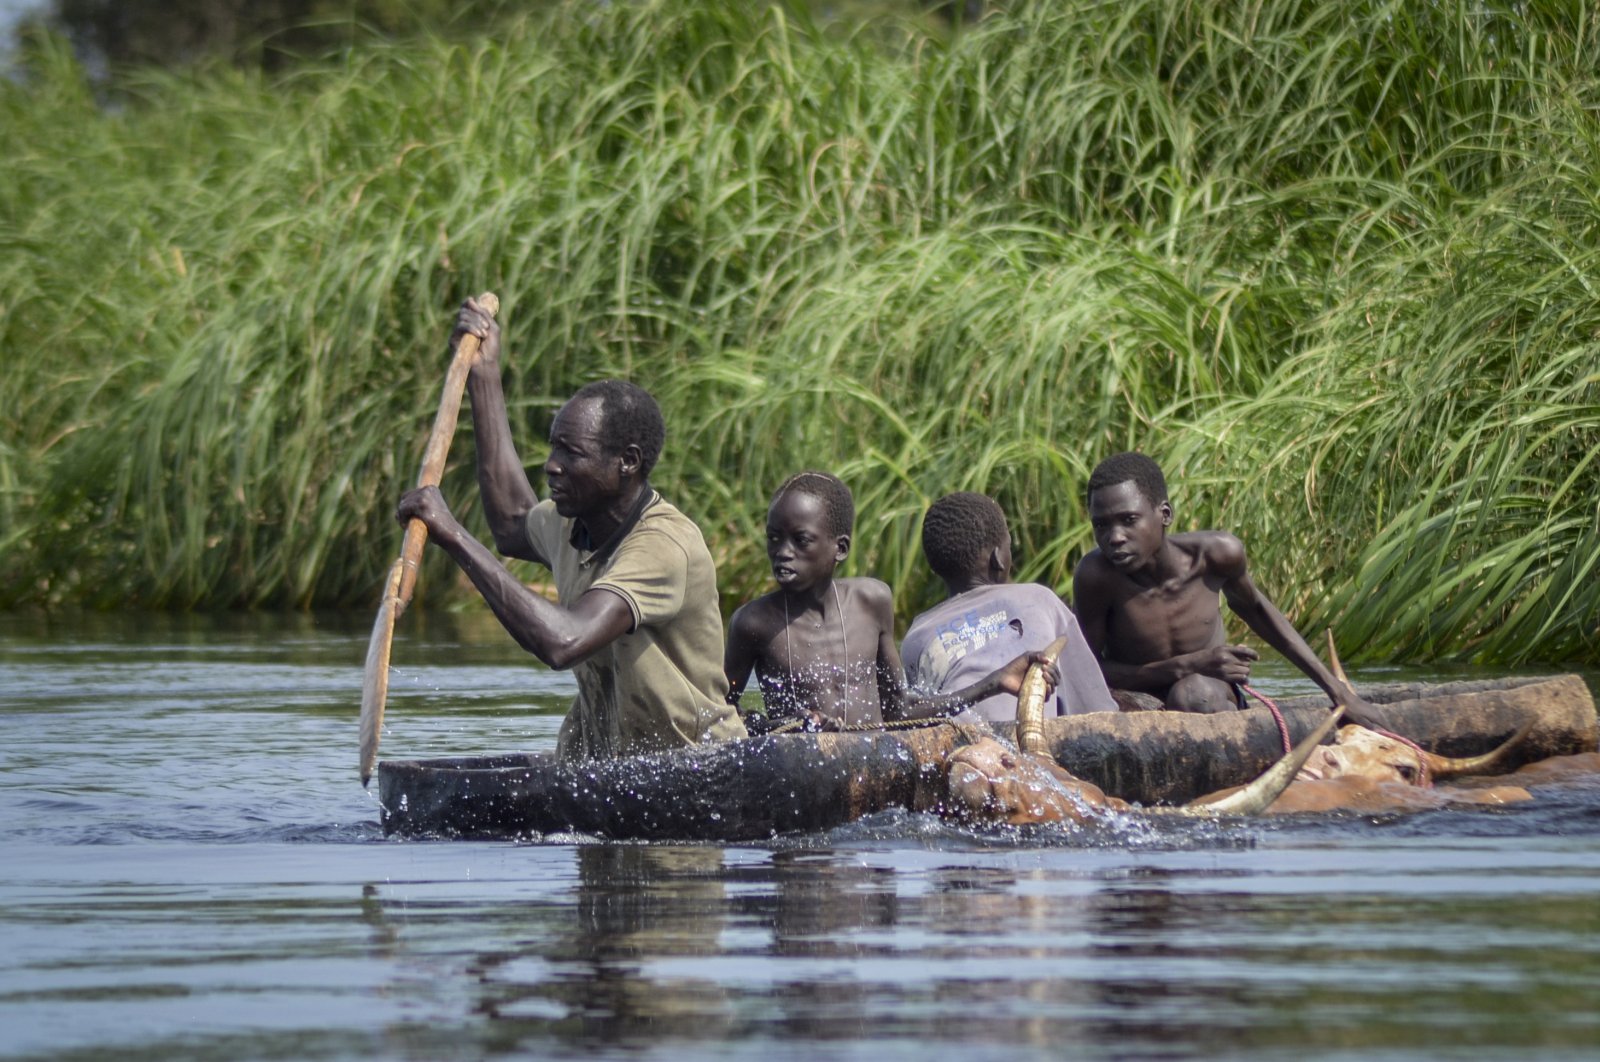 A father and his sons transport cows from a flooded area to drier ground using a dugout canoe, in Old Fangak county, Jonglei state, South Sudan, Nov. 25, 2020. (AP Photo)